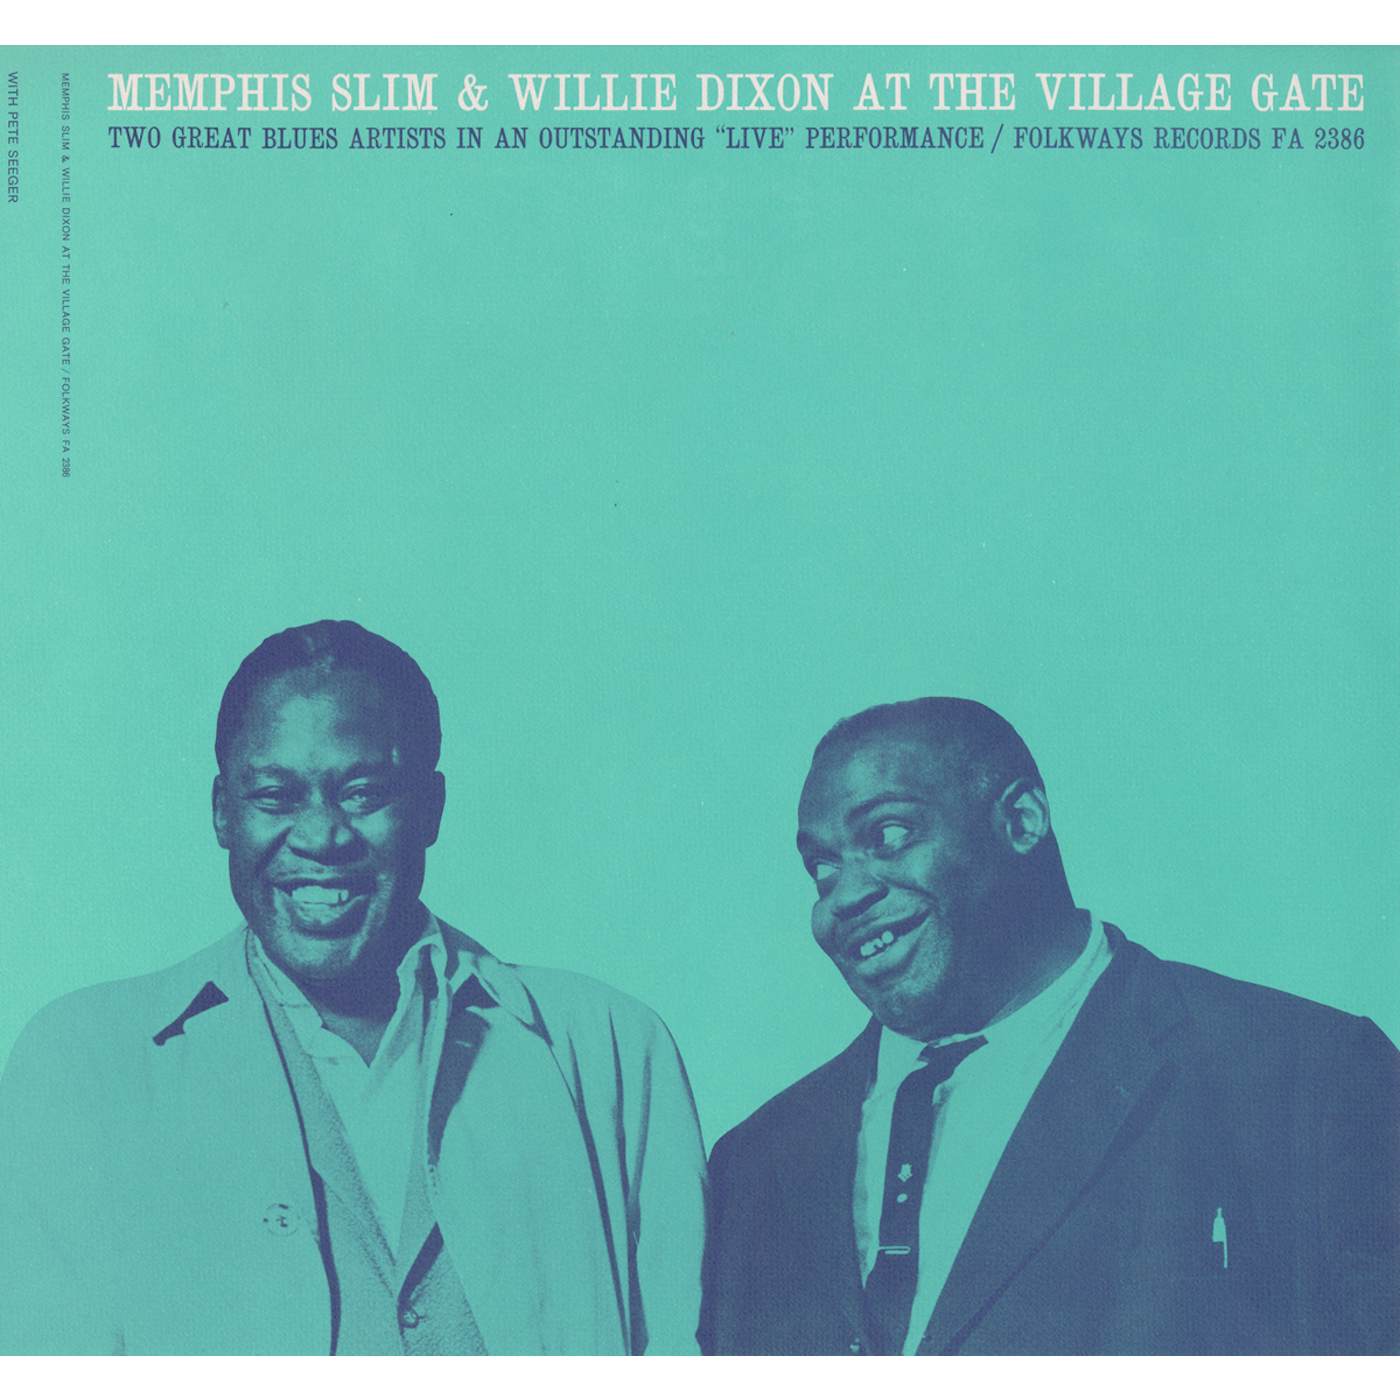 Memphis Slim and Willie Dixon AT THE VILLAGE GATE WITH PETE SEEGER CD